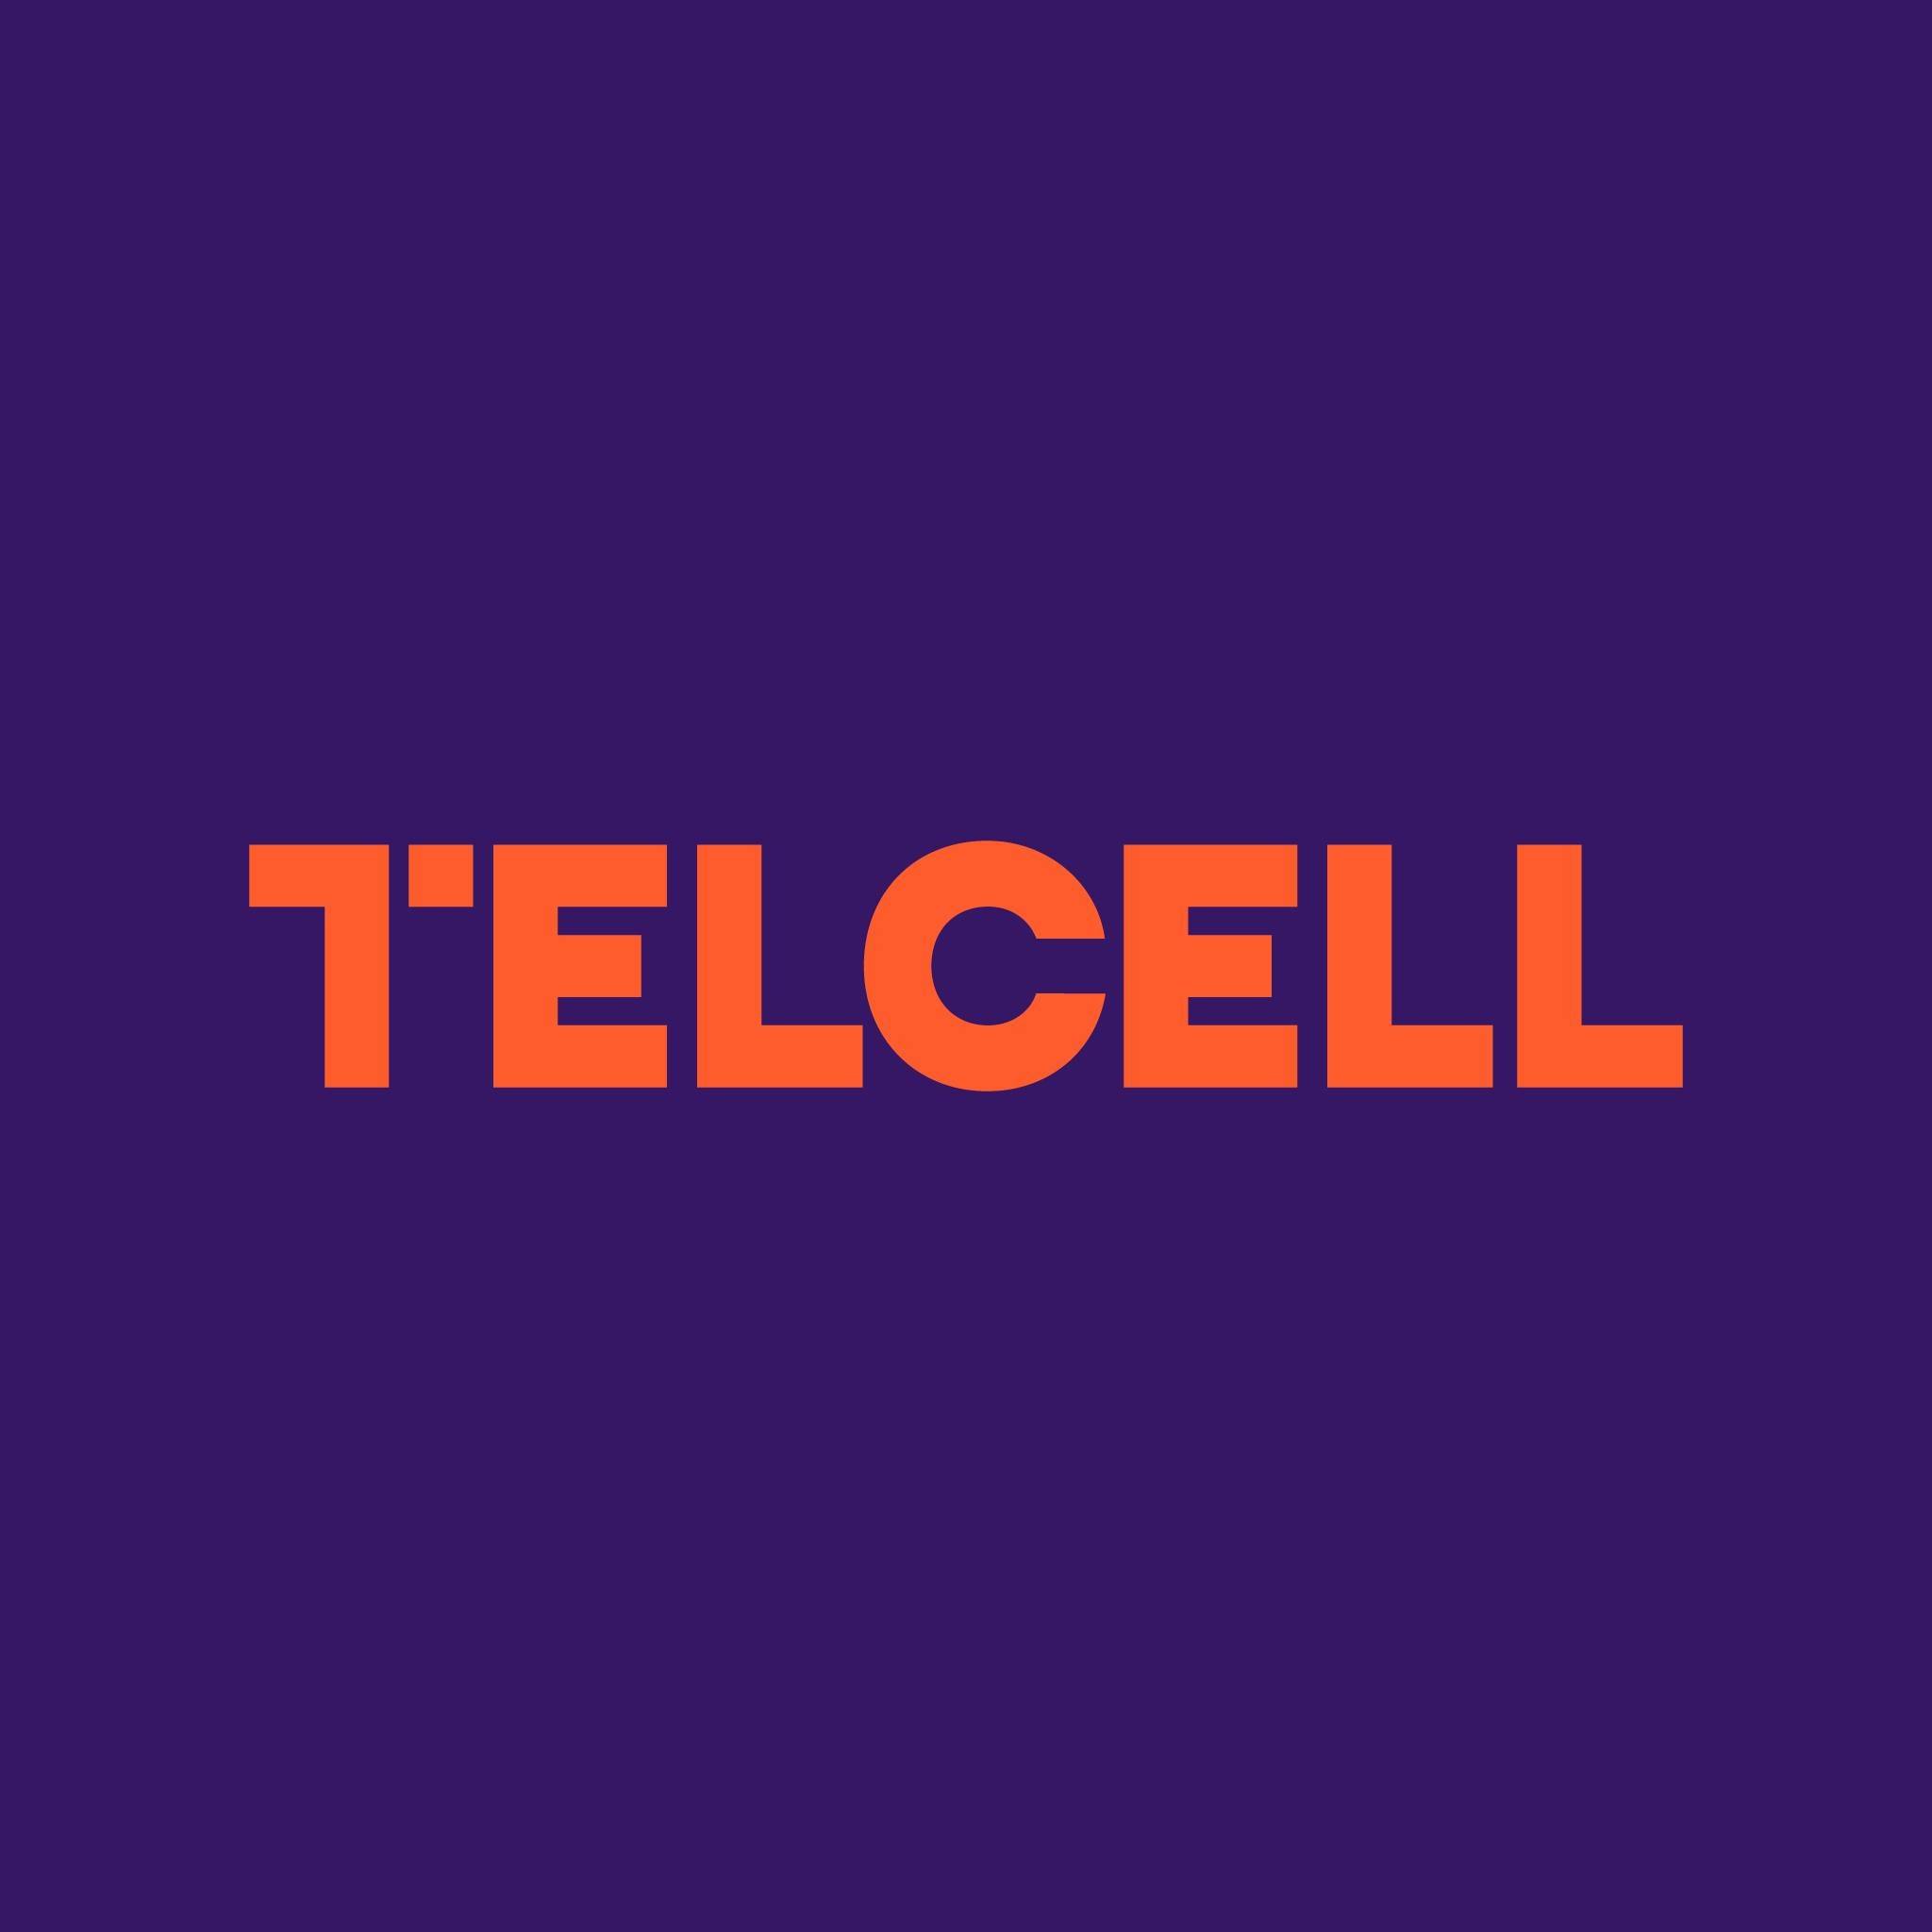 Telcell is people who create value